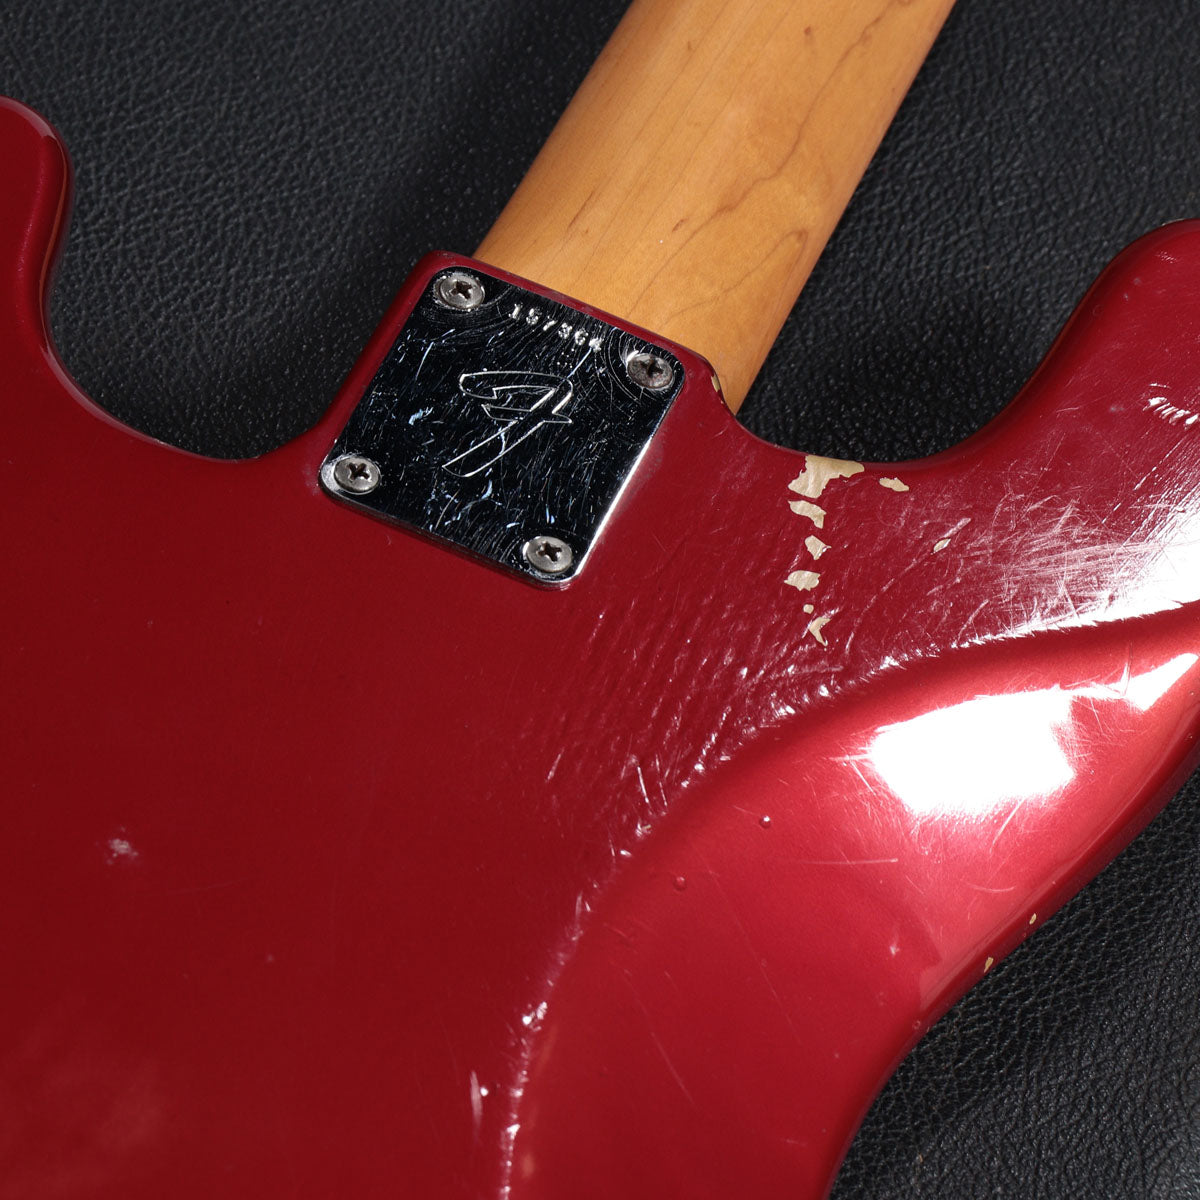 [SN 157364] USED FENDER / 1966 PRECISIONBASS CANDY APPLE RED [05]